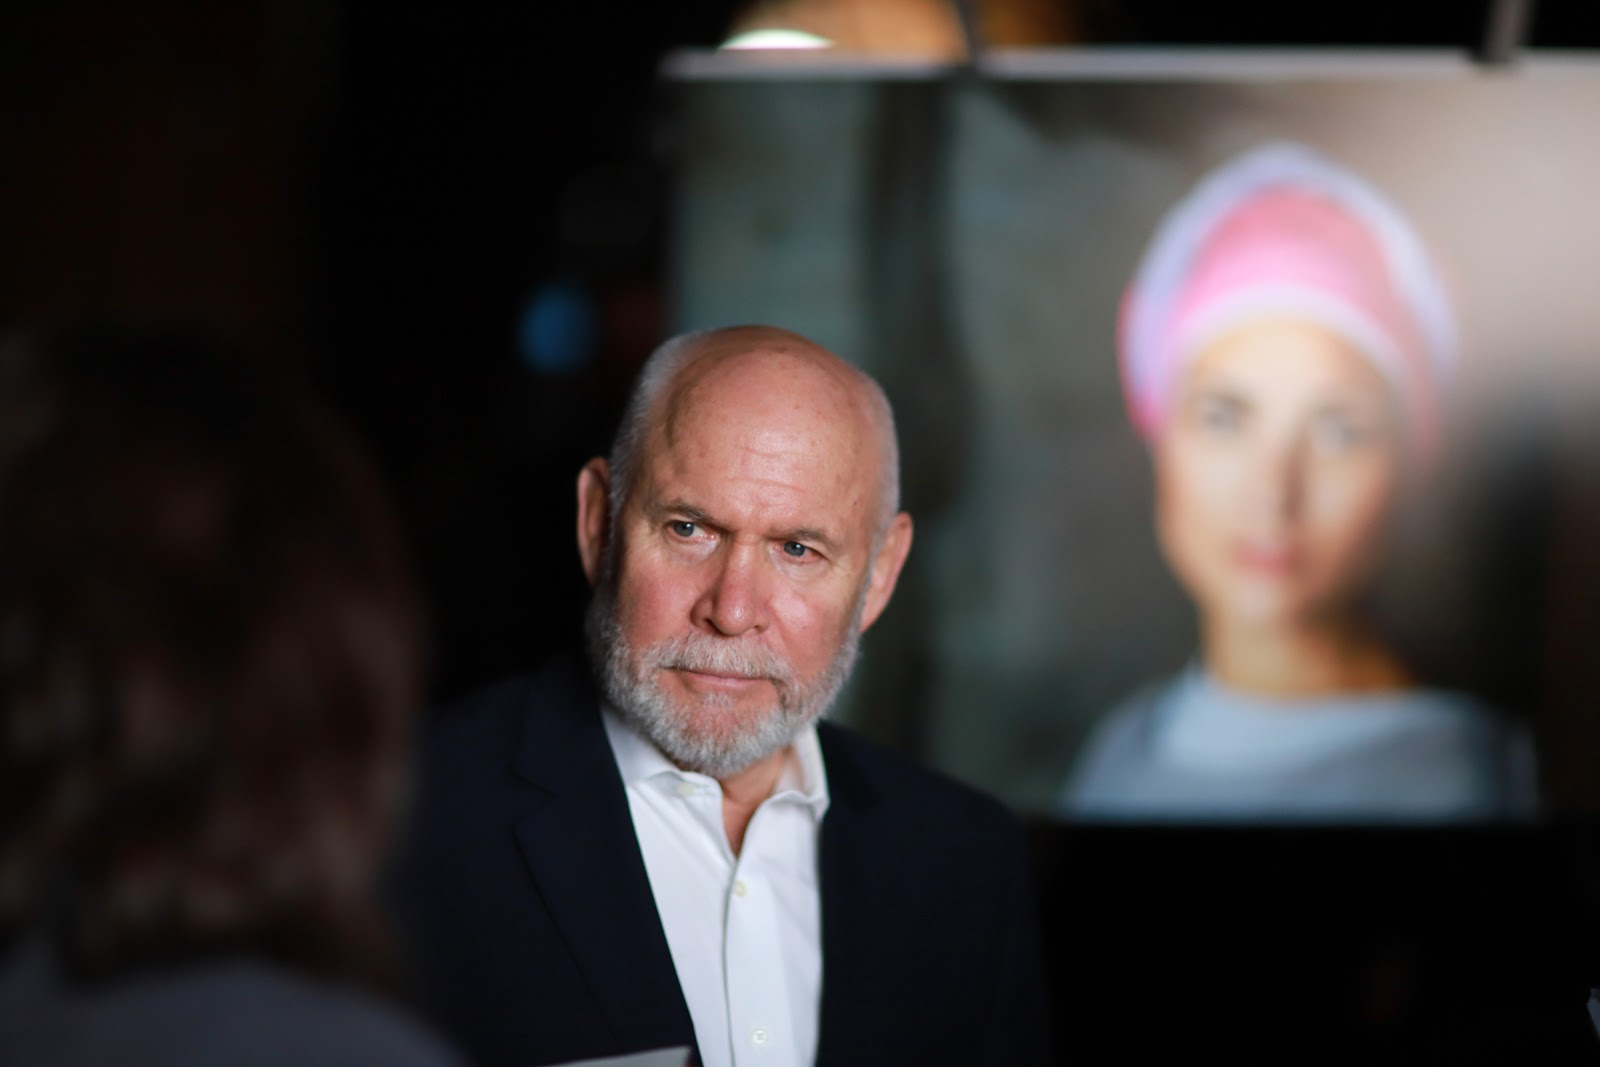 Steve McCurry: The Complications of Photography